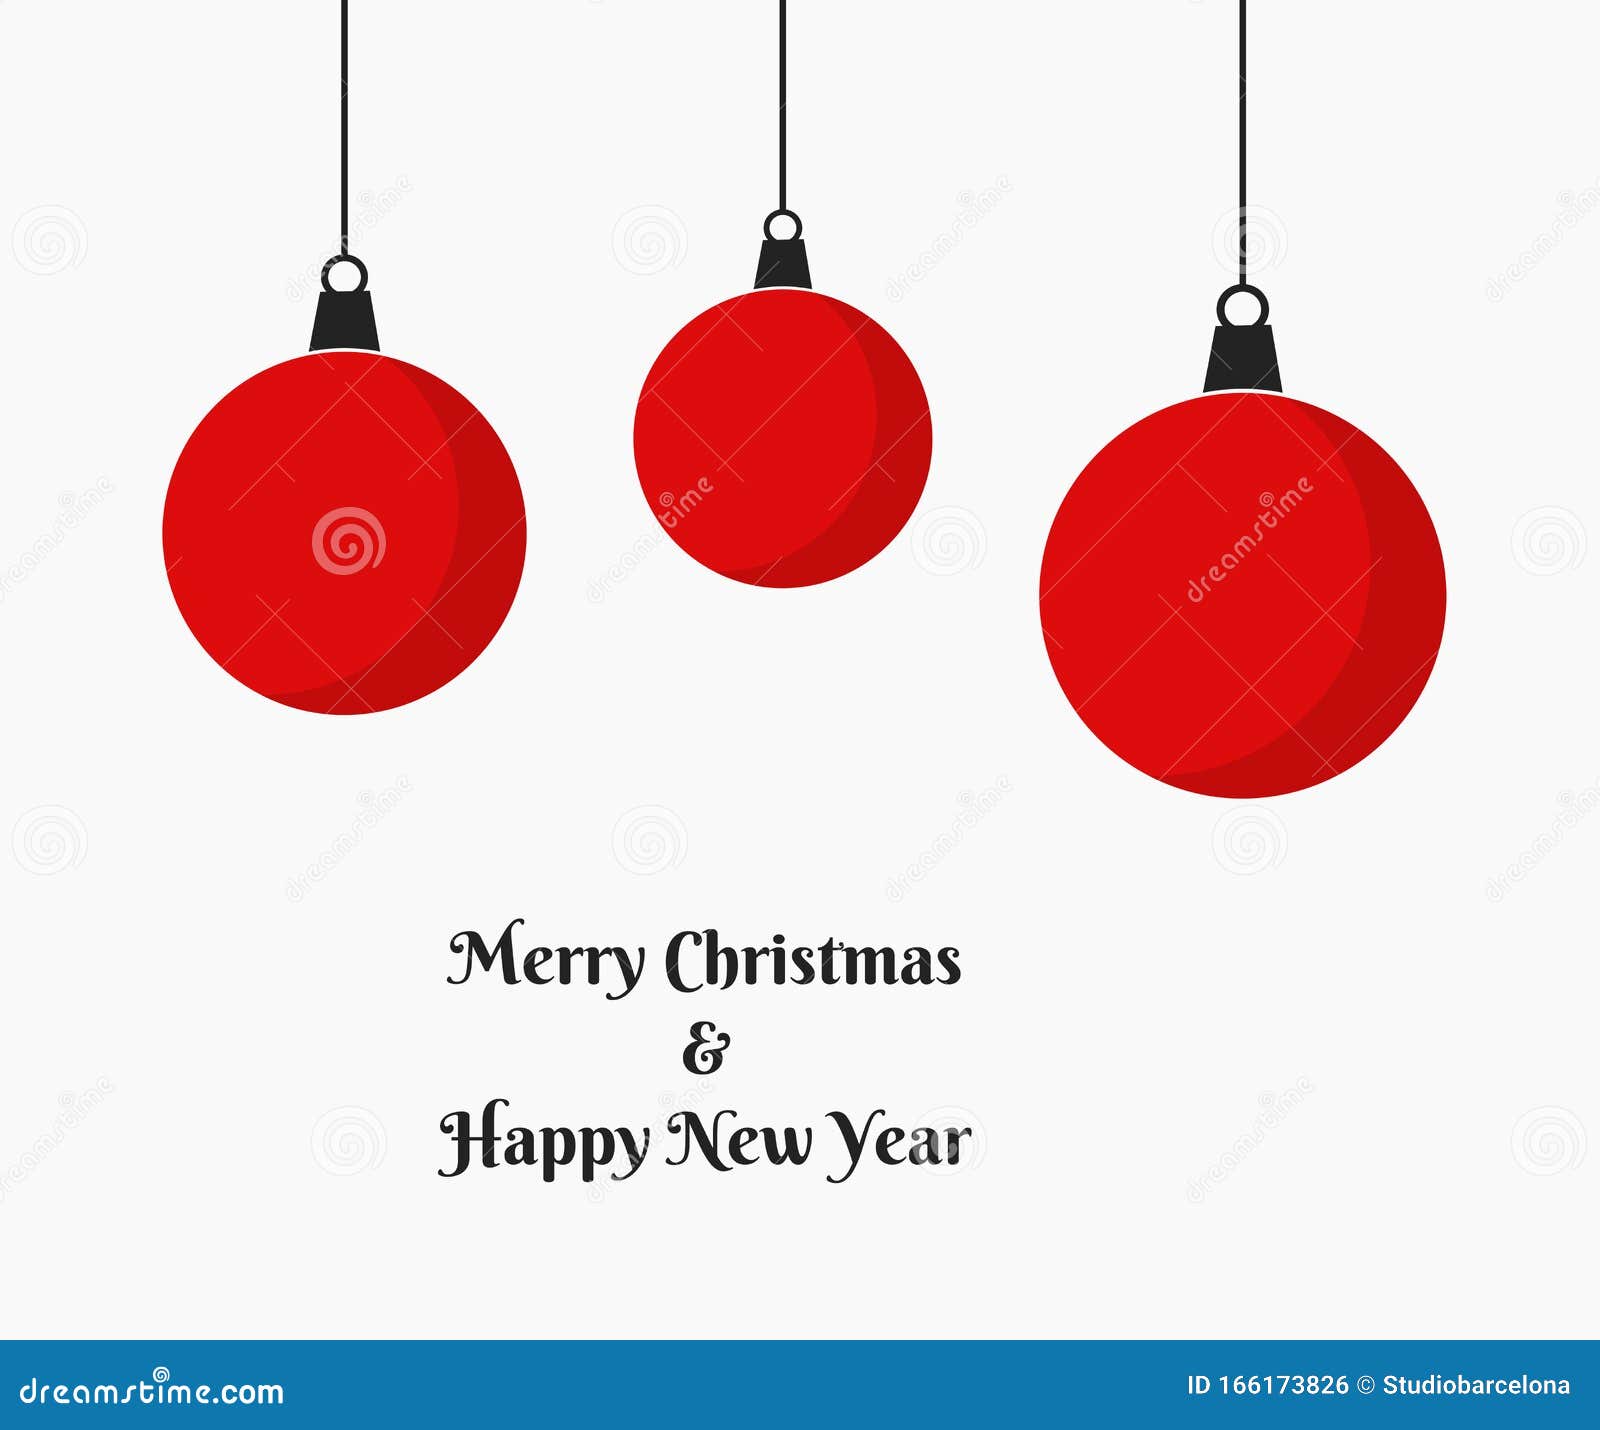 Christmas Red Balls Hanging Ornaments Stock Vector - Illustration of ...